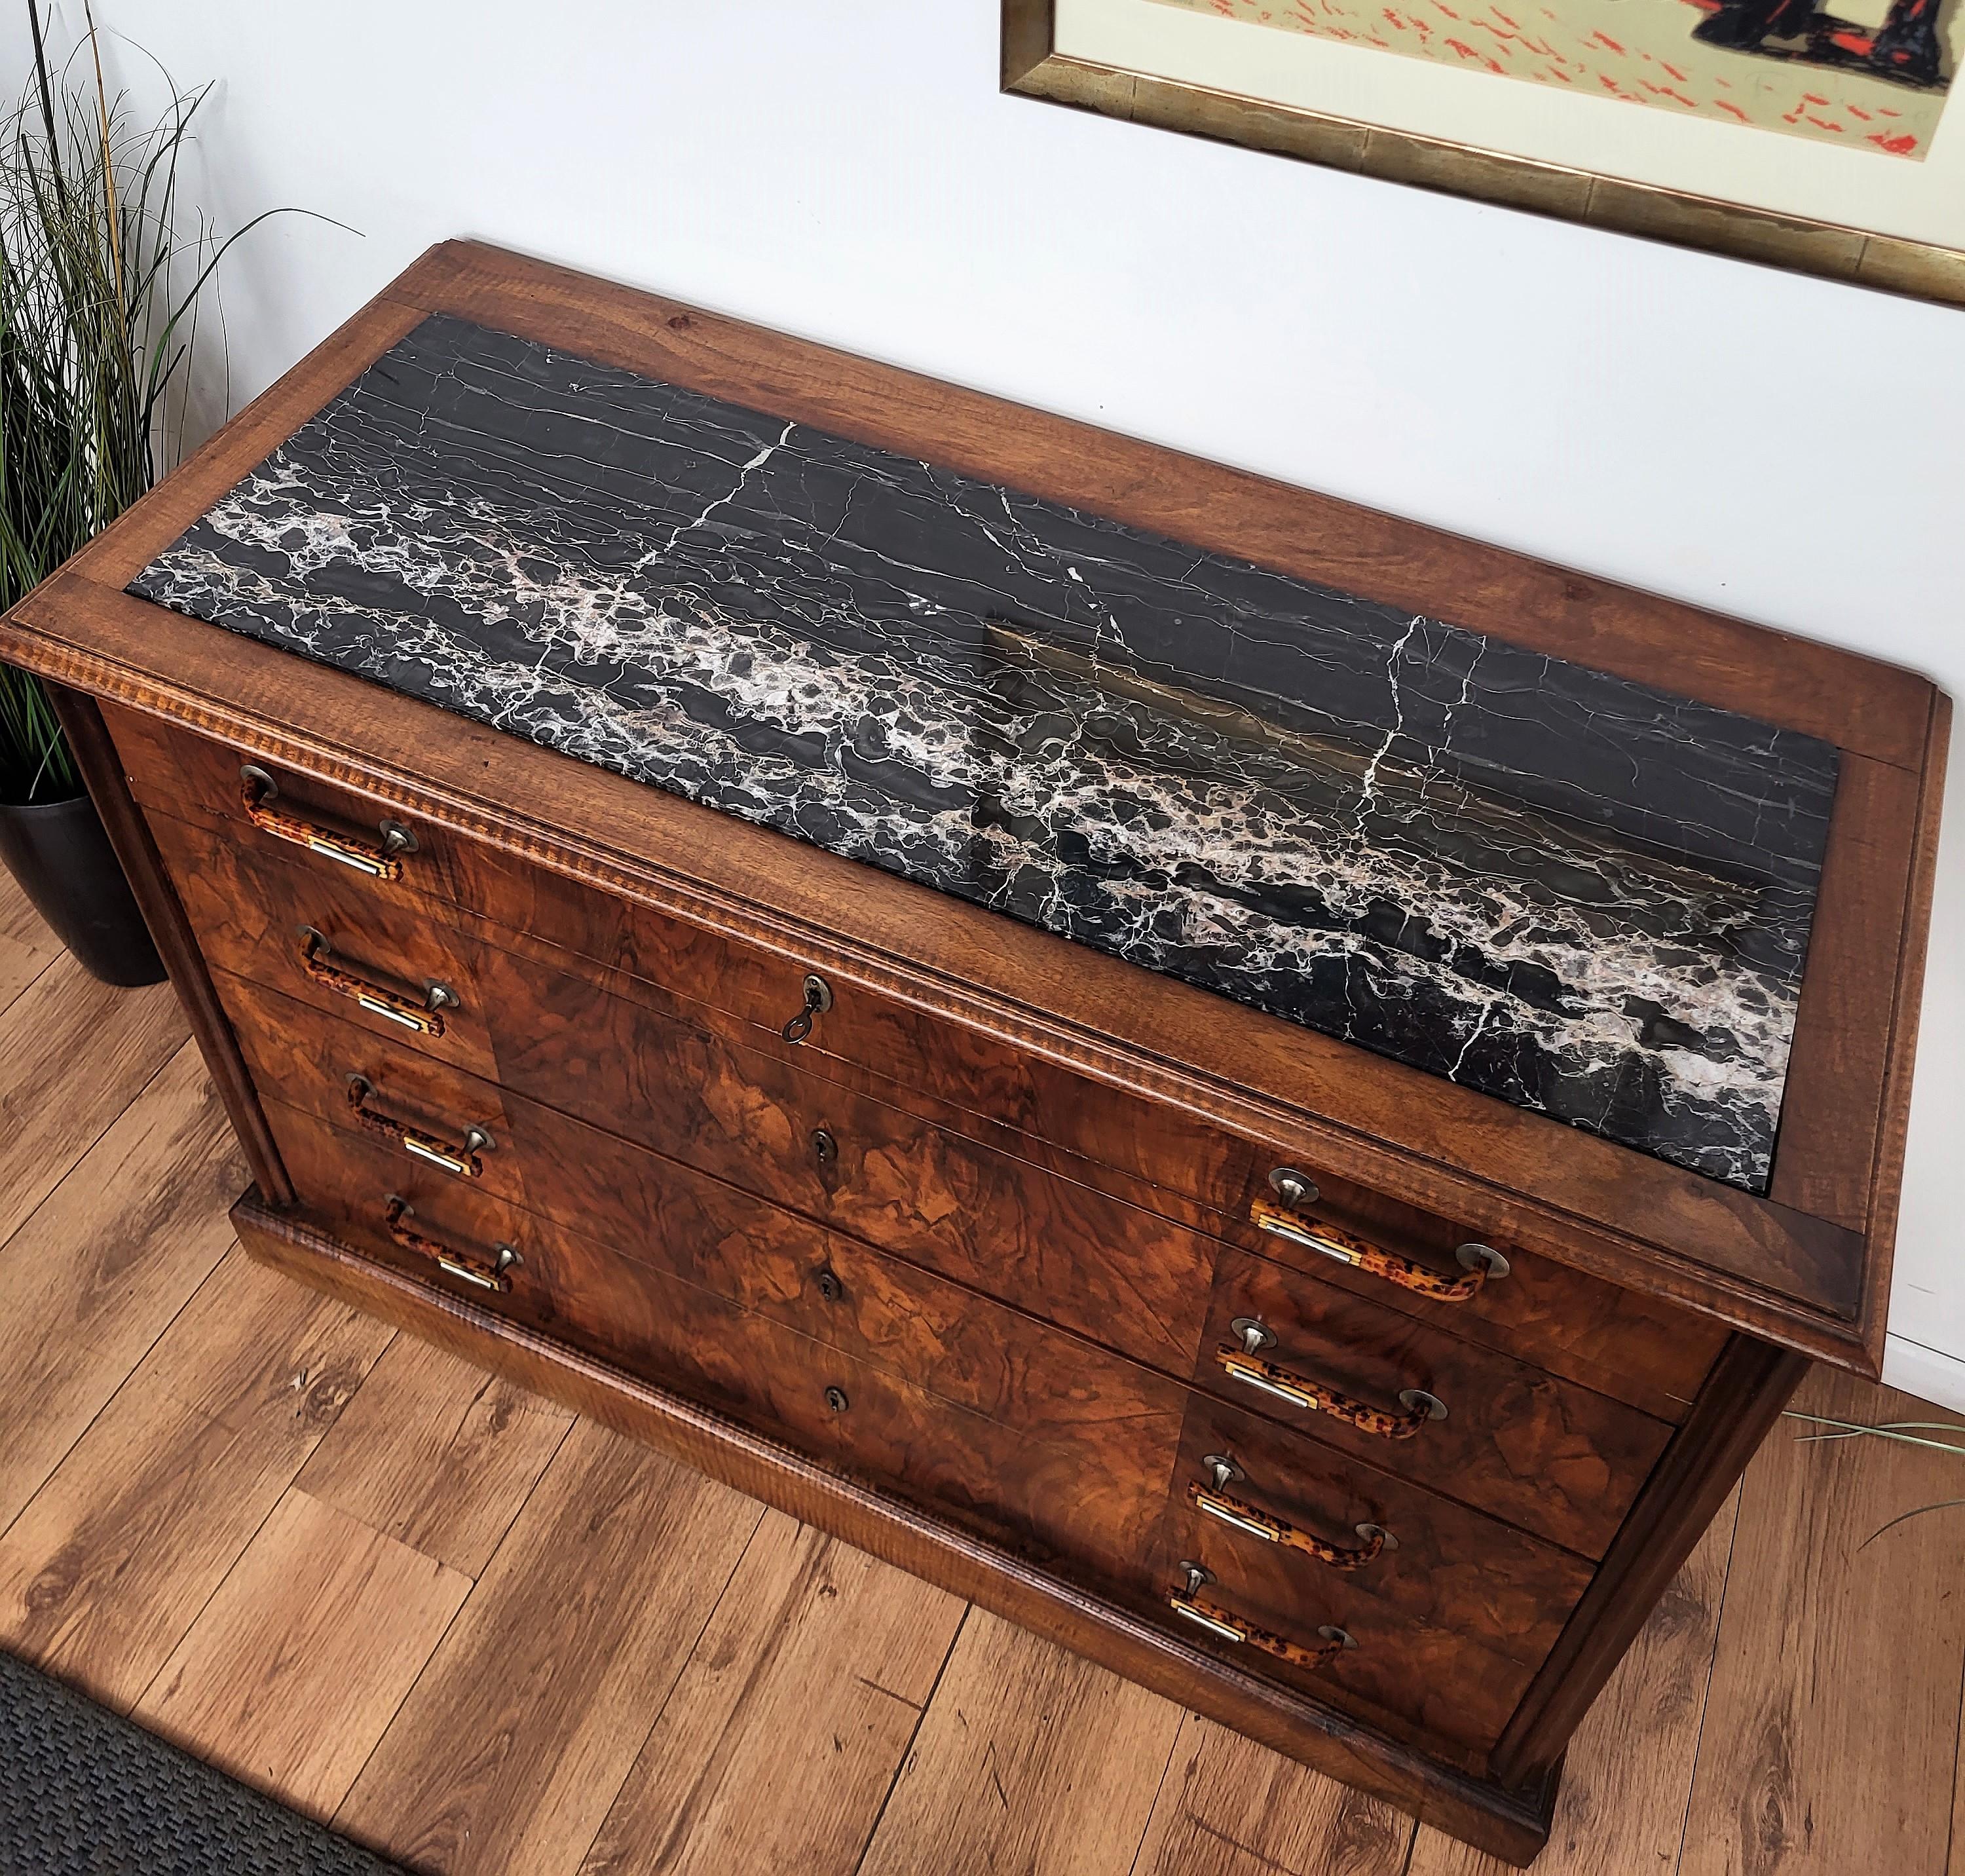 Antique Italian Walnut Burl Portoro Marble Top Chest of Drawers Commode Credenza For Sale 1